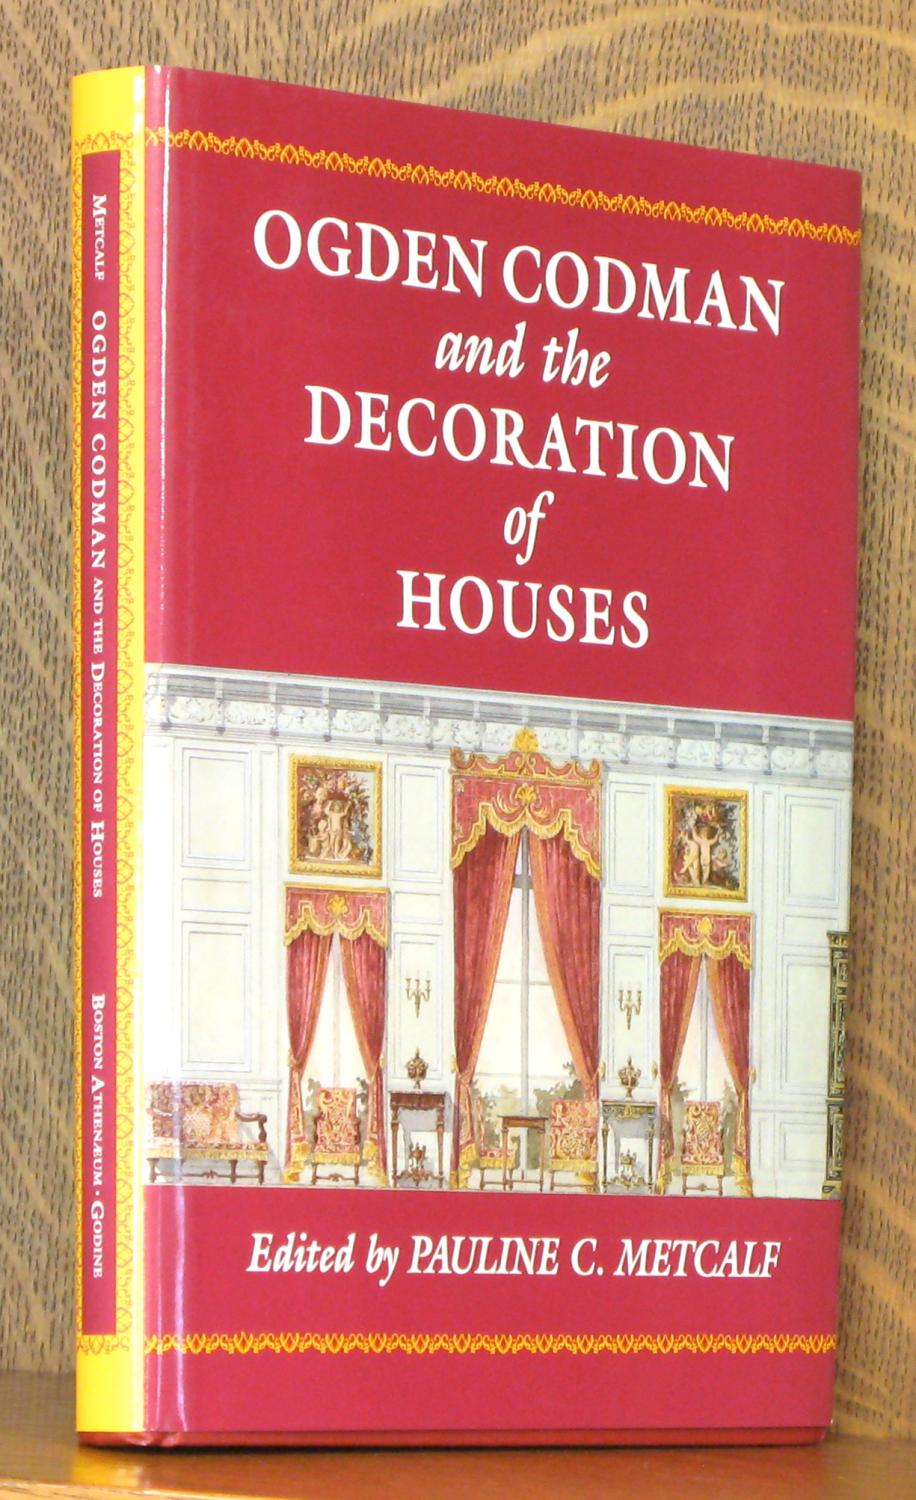 Ogden Codman And The Decoration Of Houses De Edited By Pauline